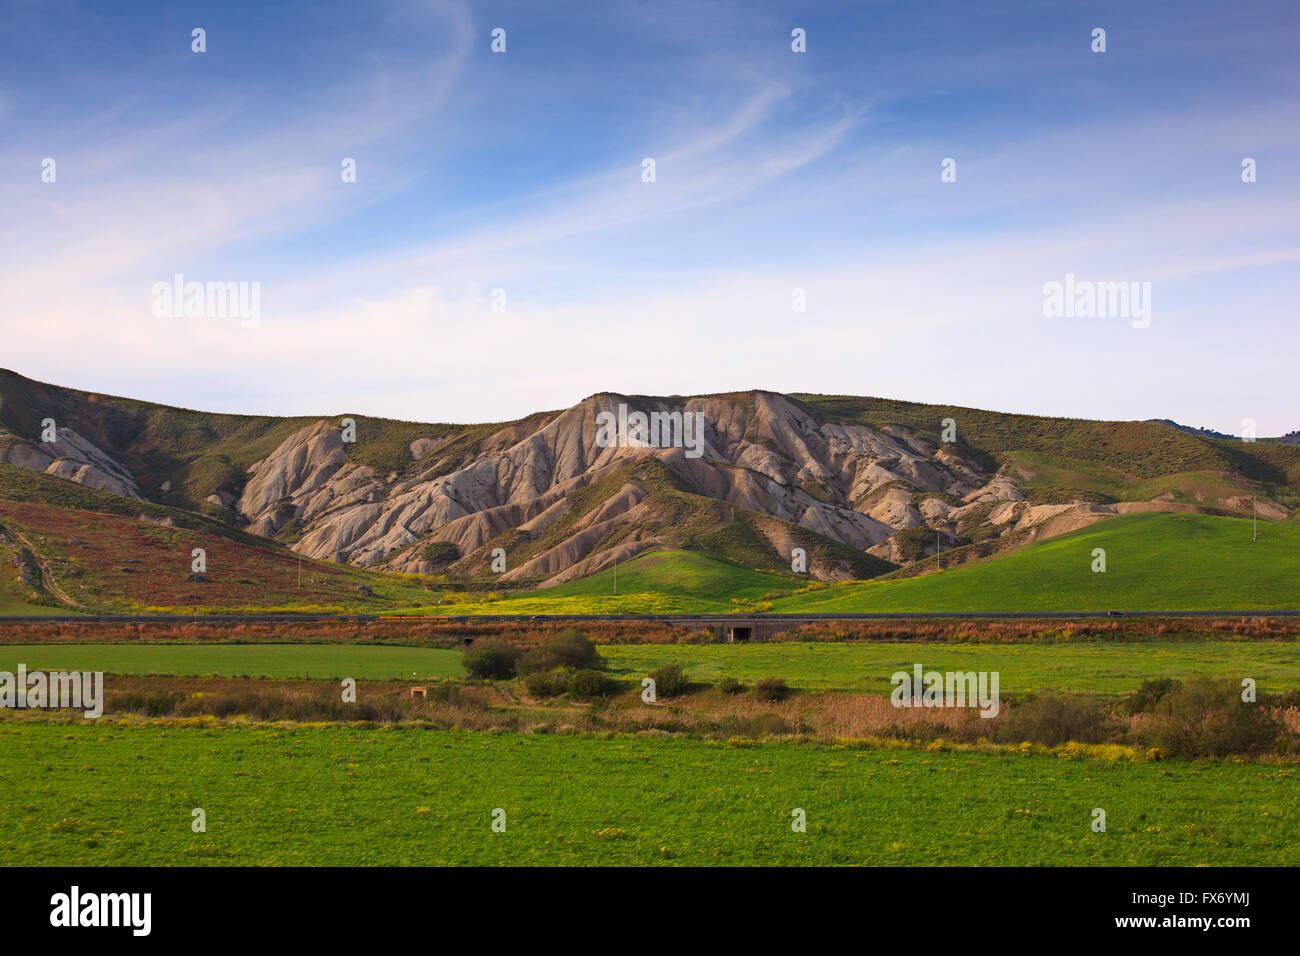 View of inland Sicily hills in the spring season Stock Photo